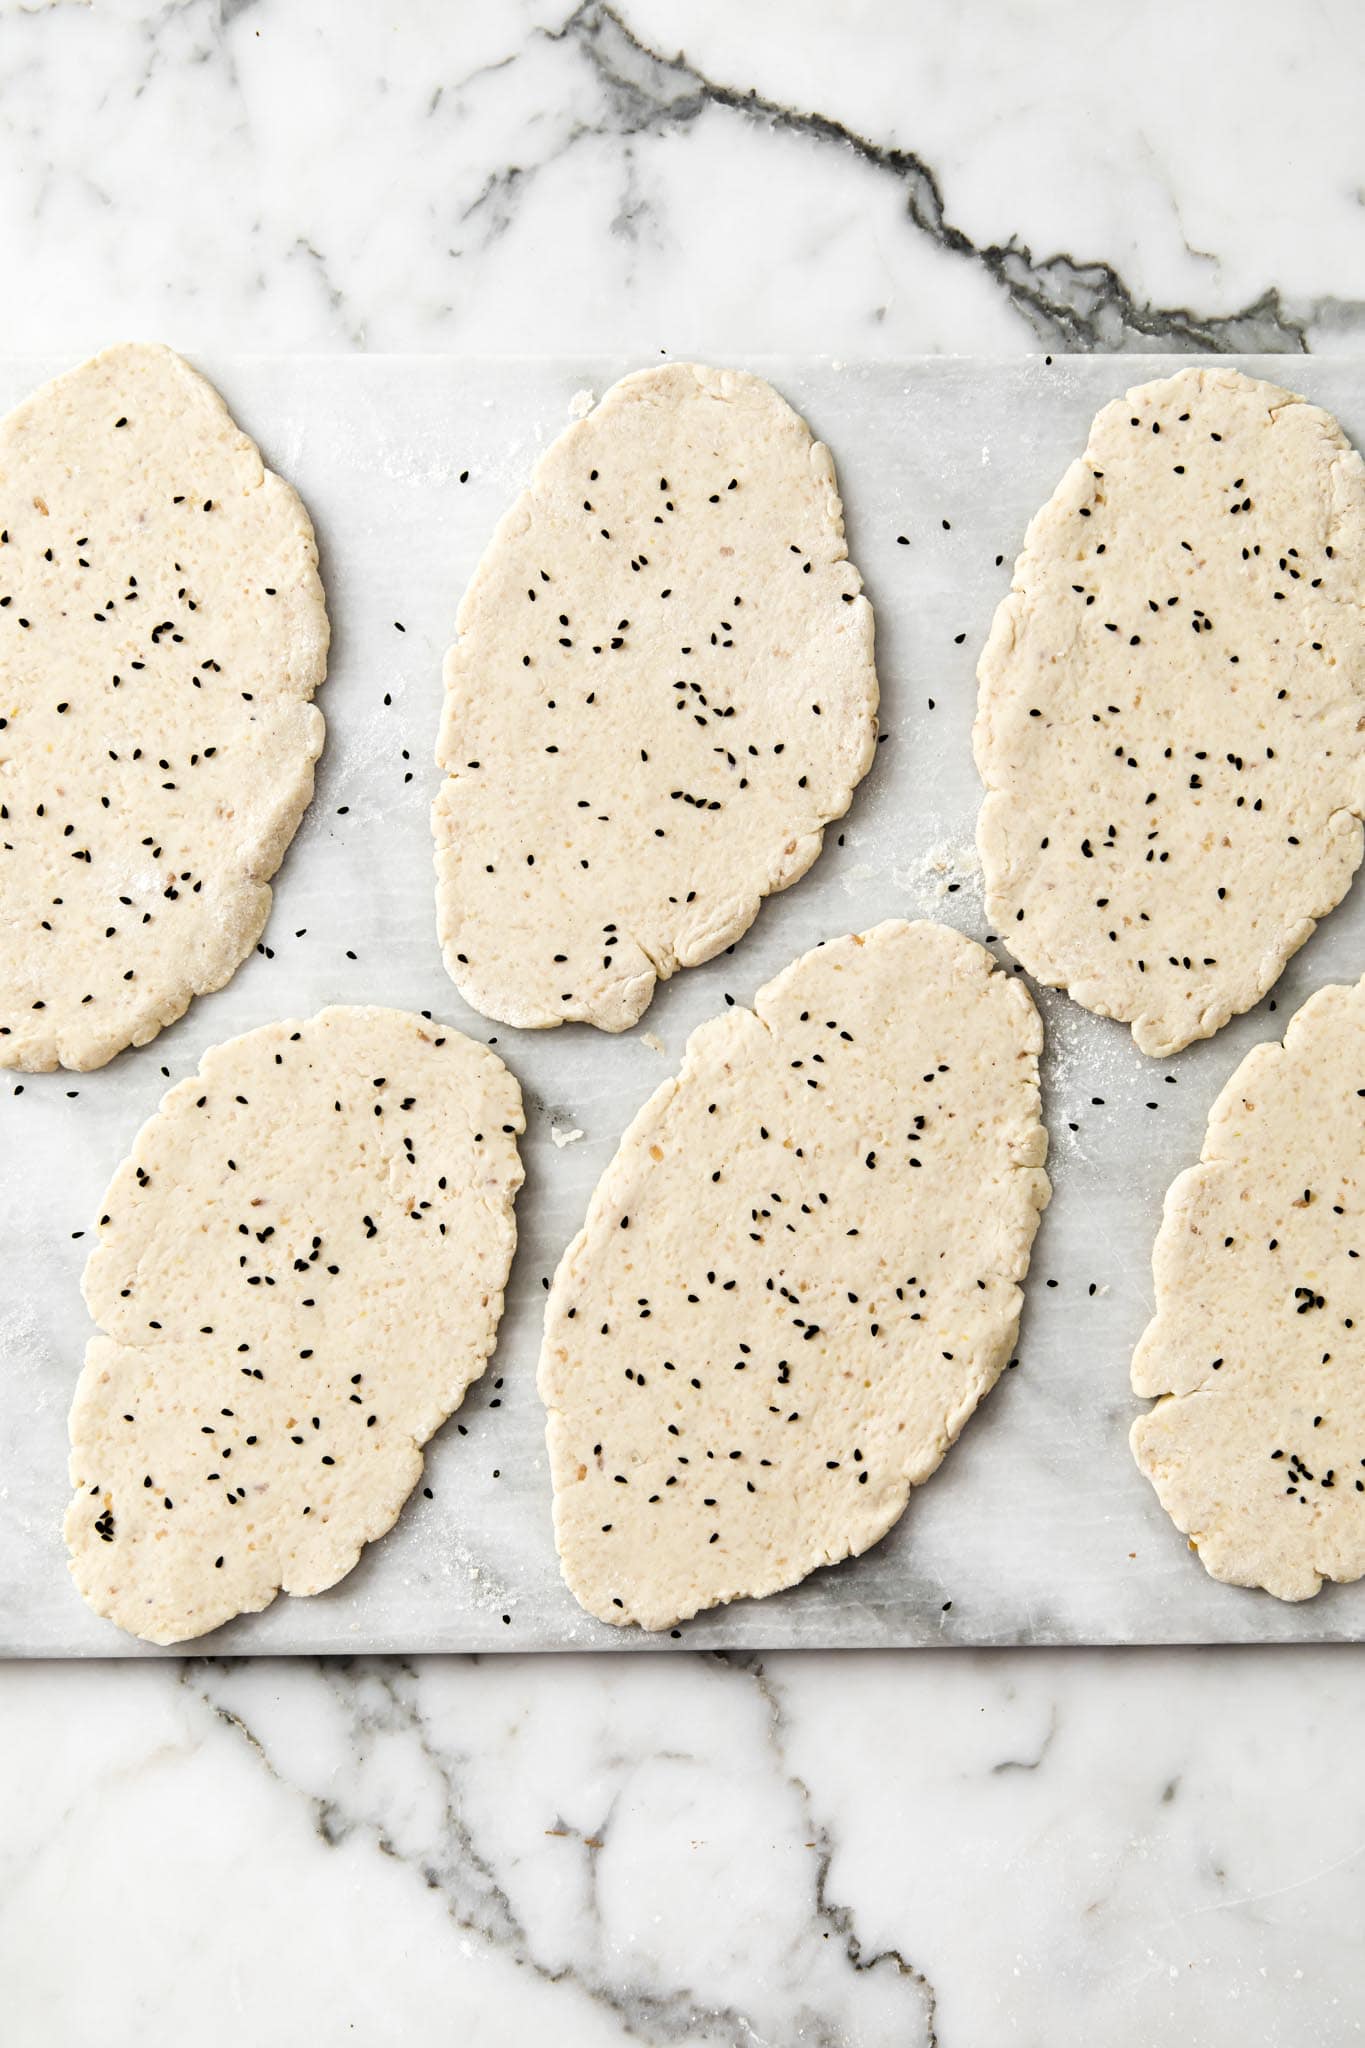 Rolled out Gluten-free naan sprinkled with nigella seeds on a marbled surface